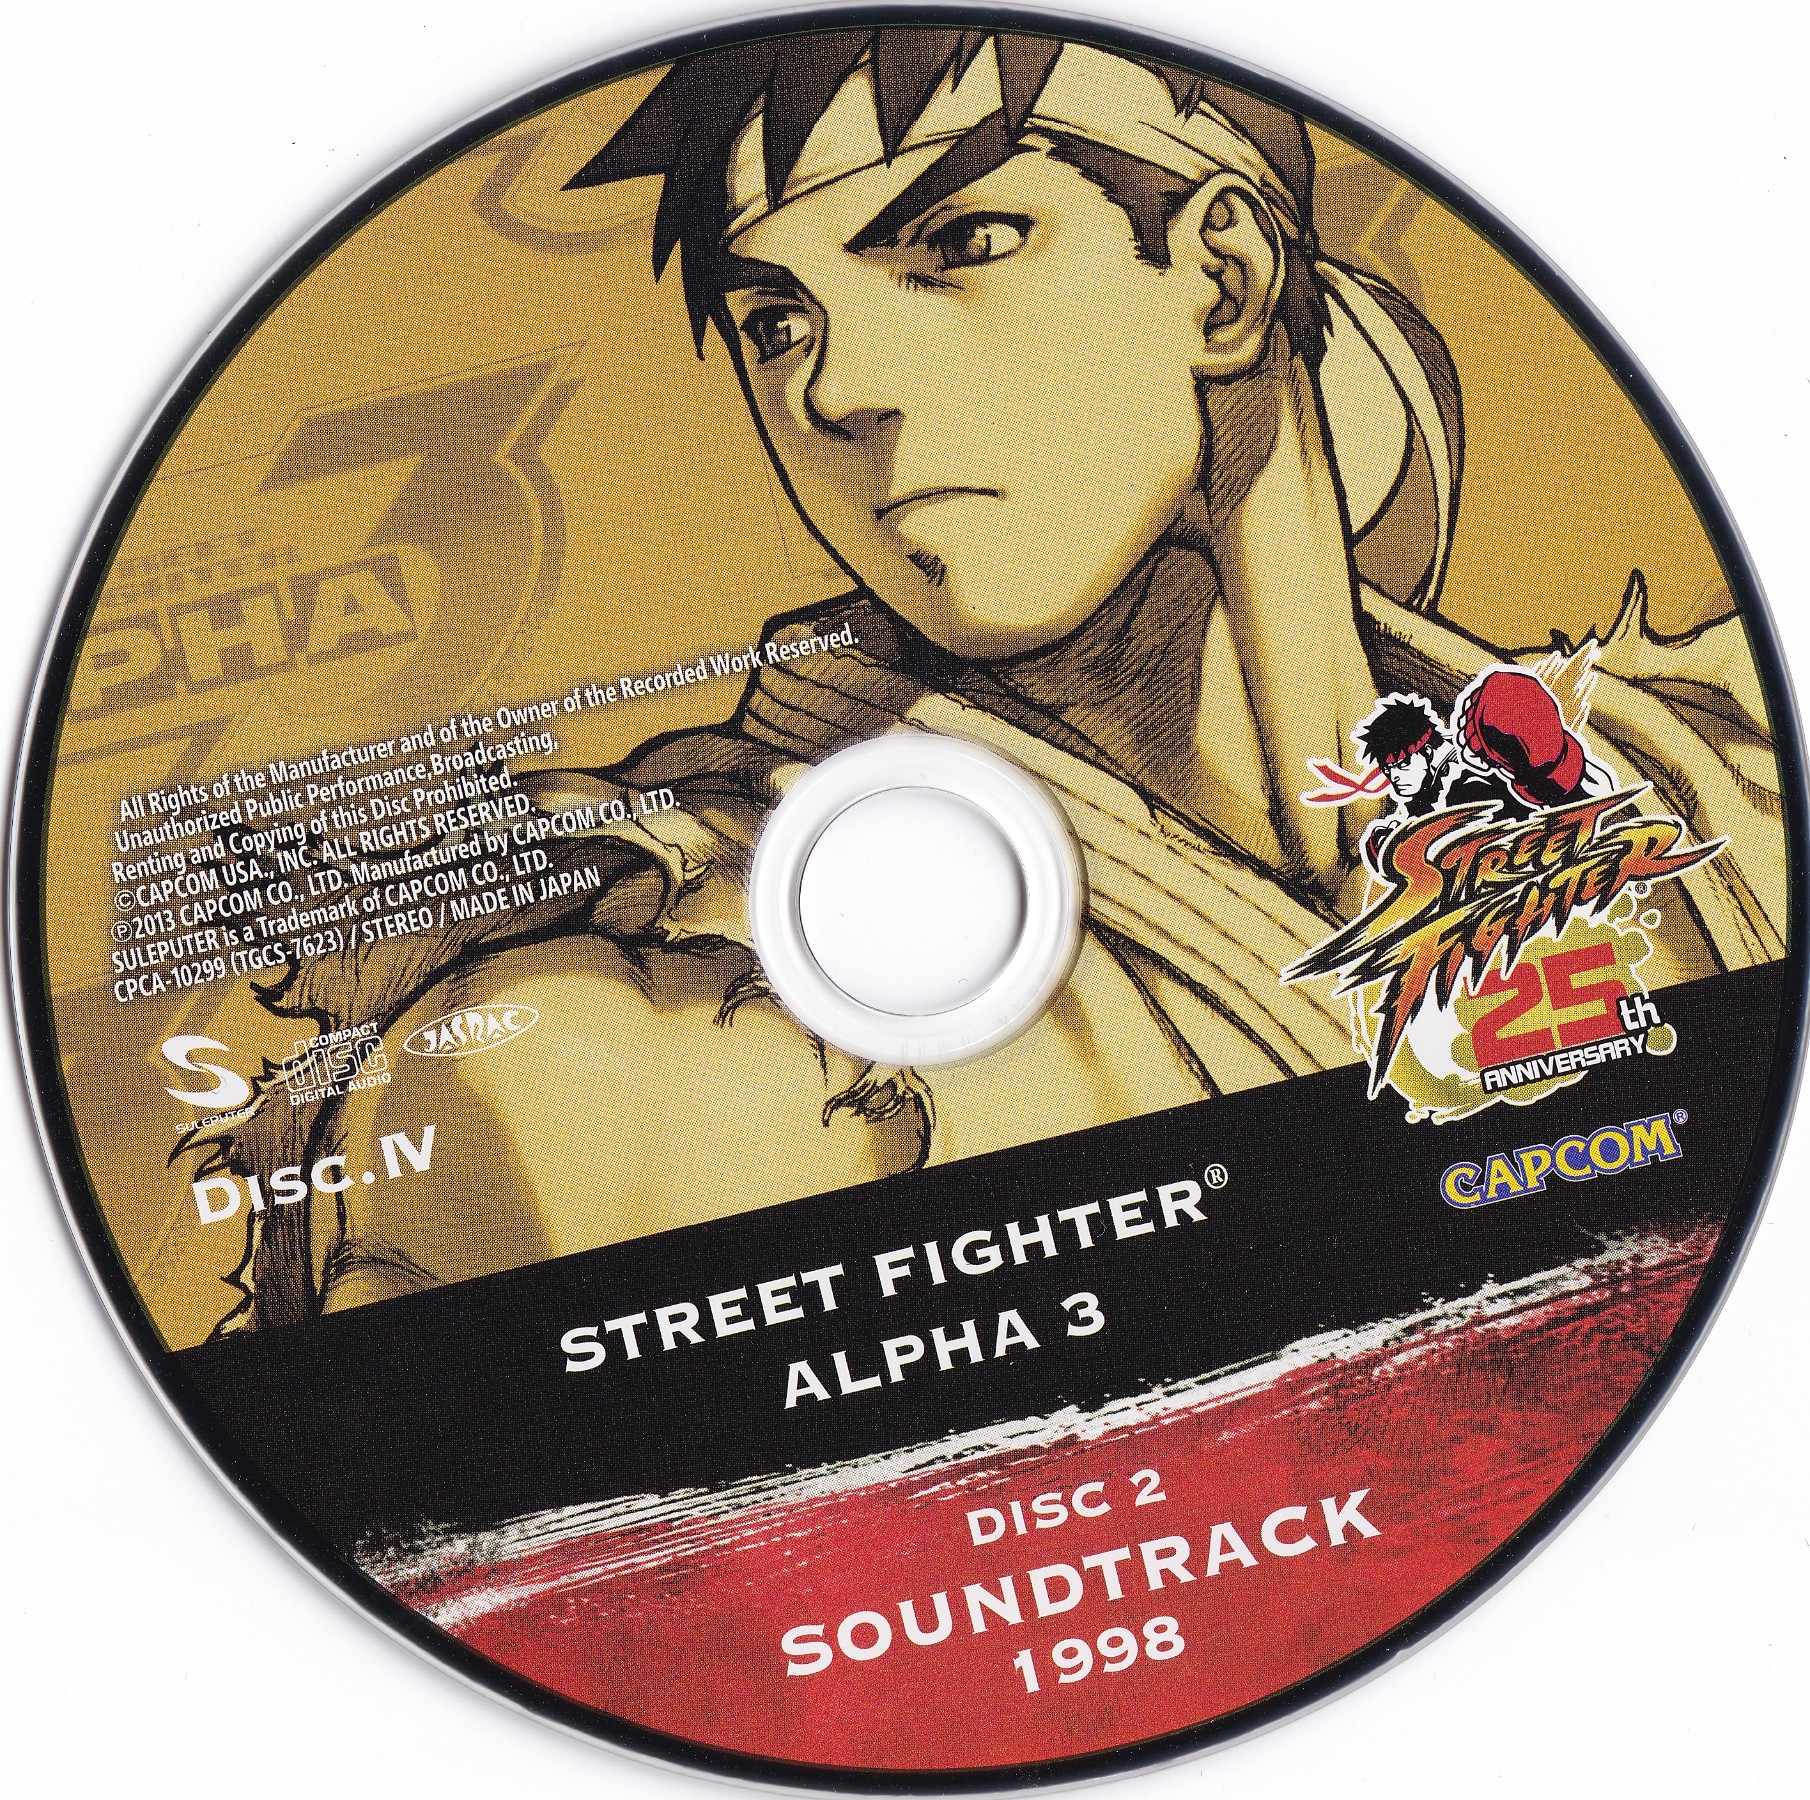 STREET FIGHTER 25th SOUND BOX (2013) MP3 - Download STREET FIGHTER 